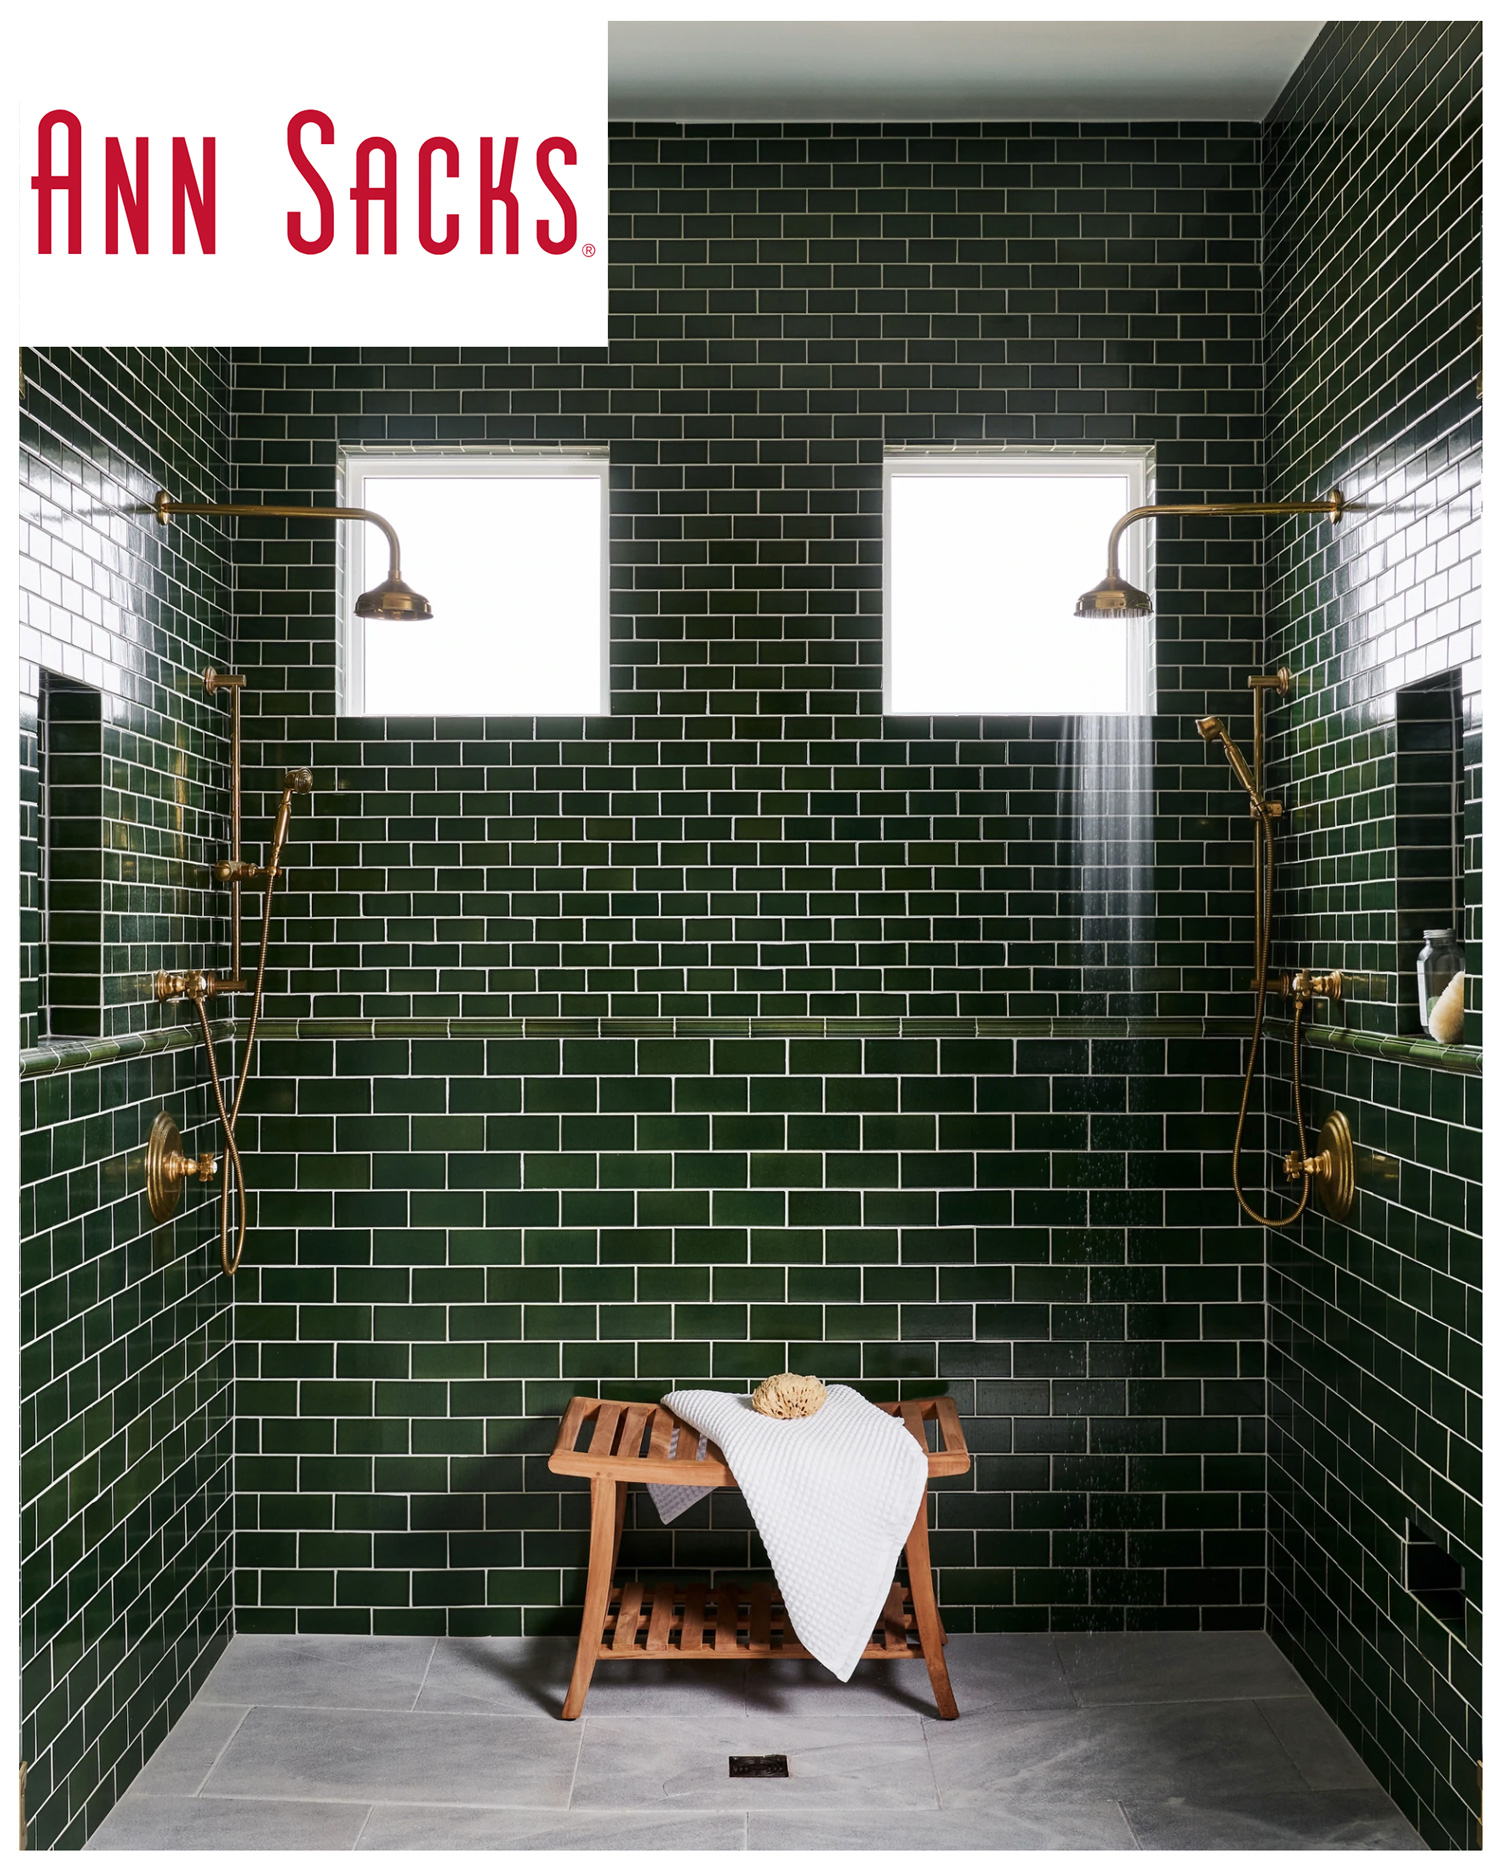 Ann Sacks – The Insider: A Case for Colorful Tile by Sophie Donelson